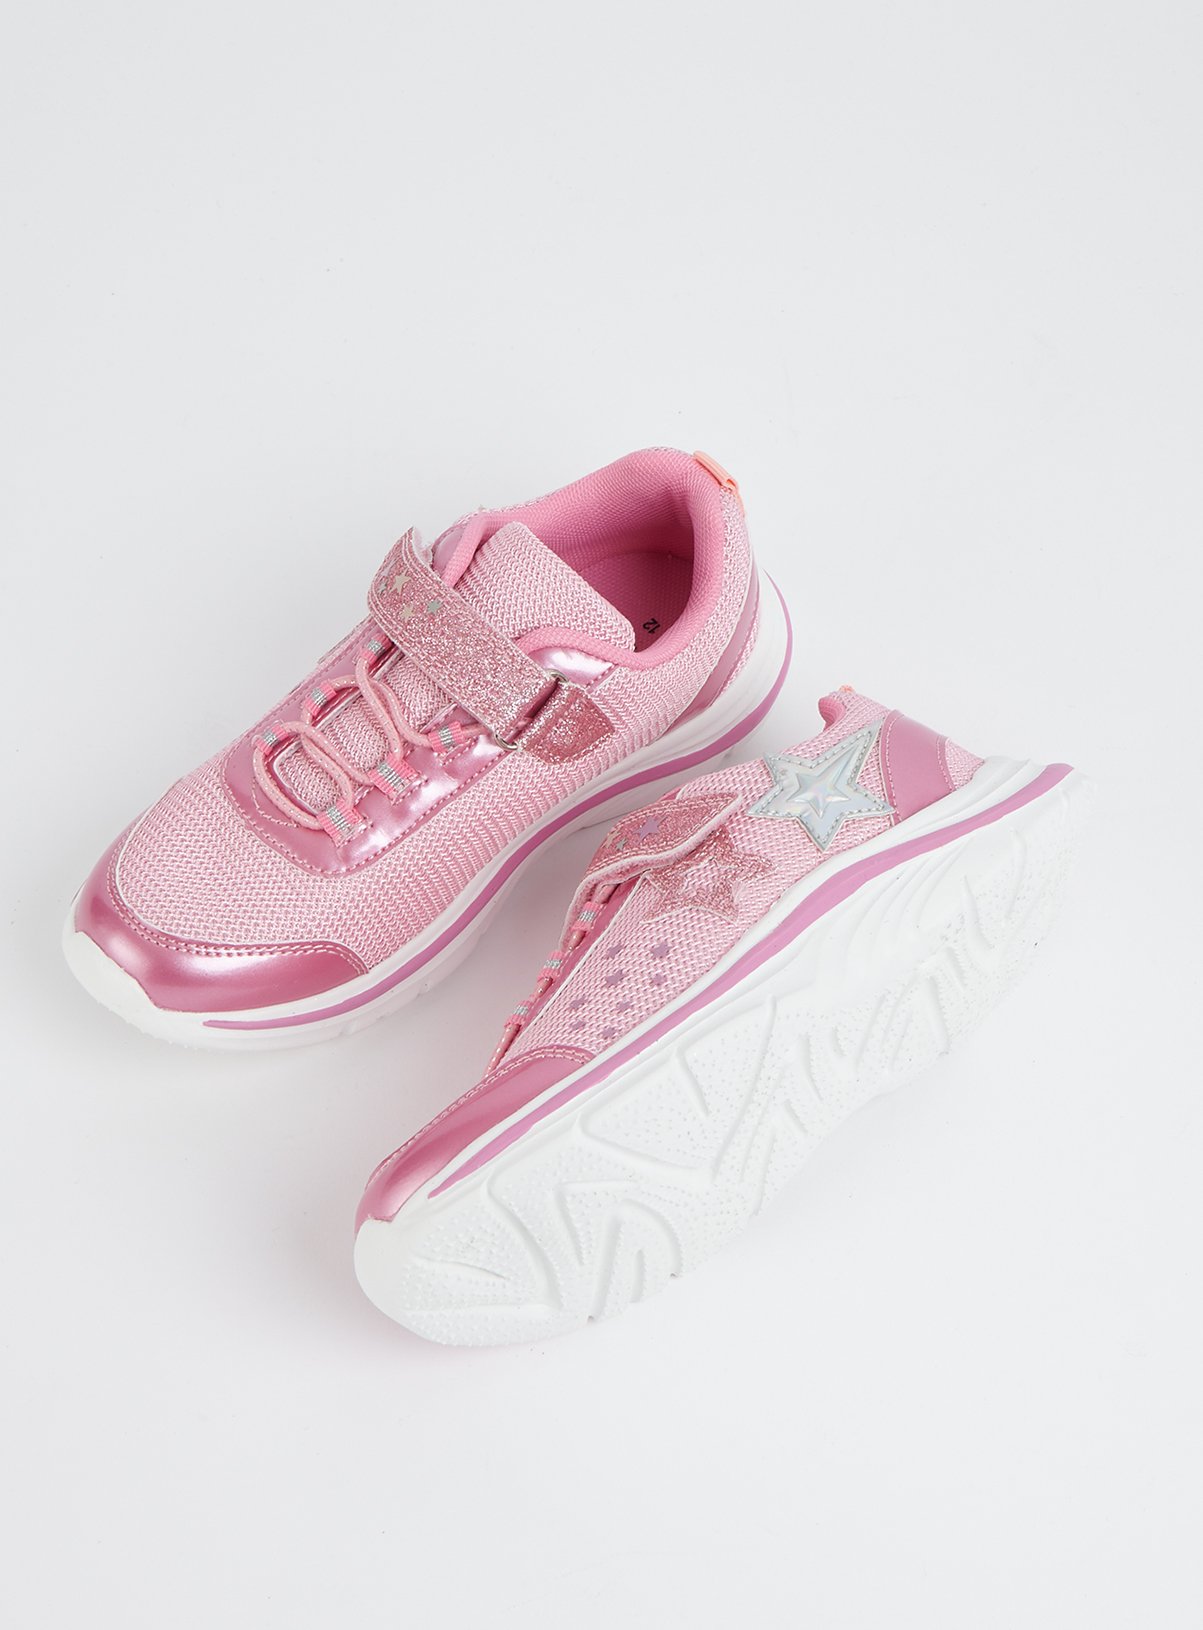 pink sparkly nike trainers